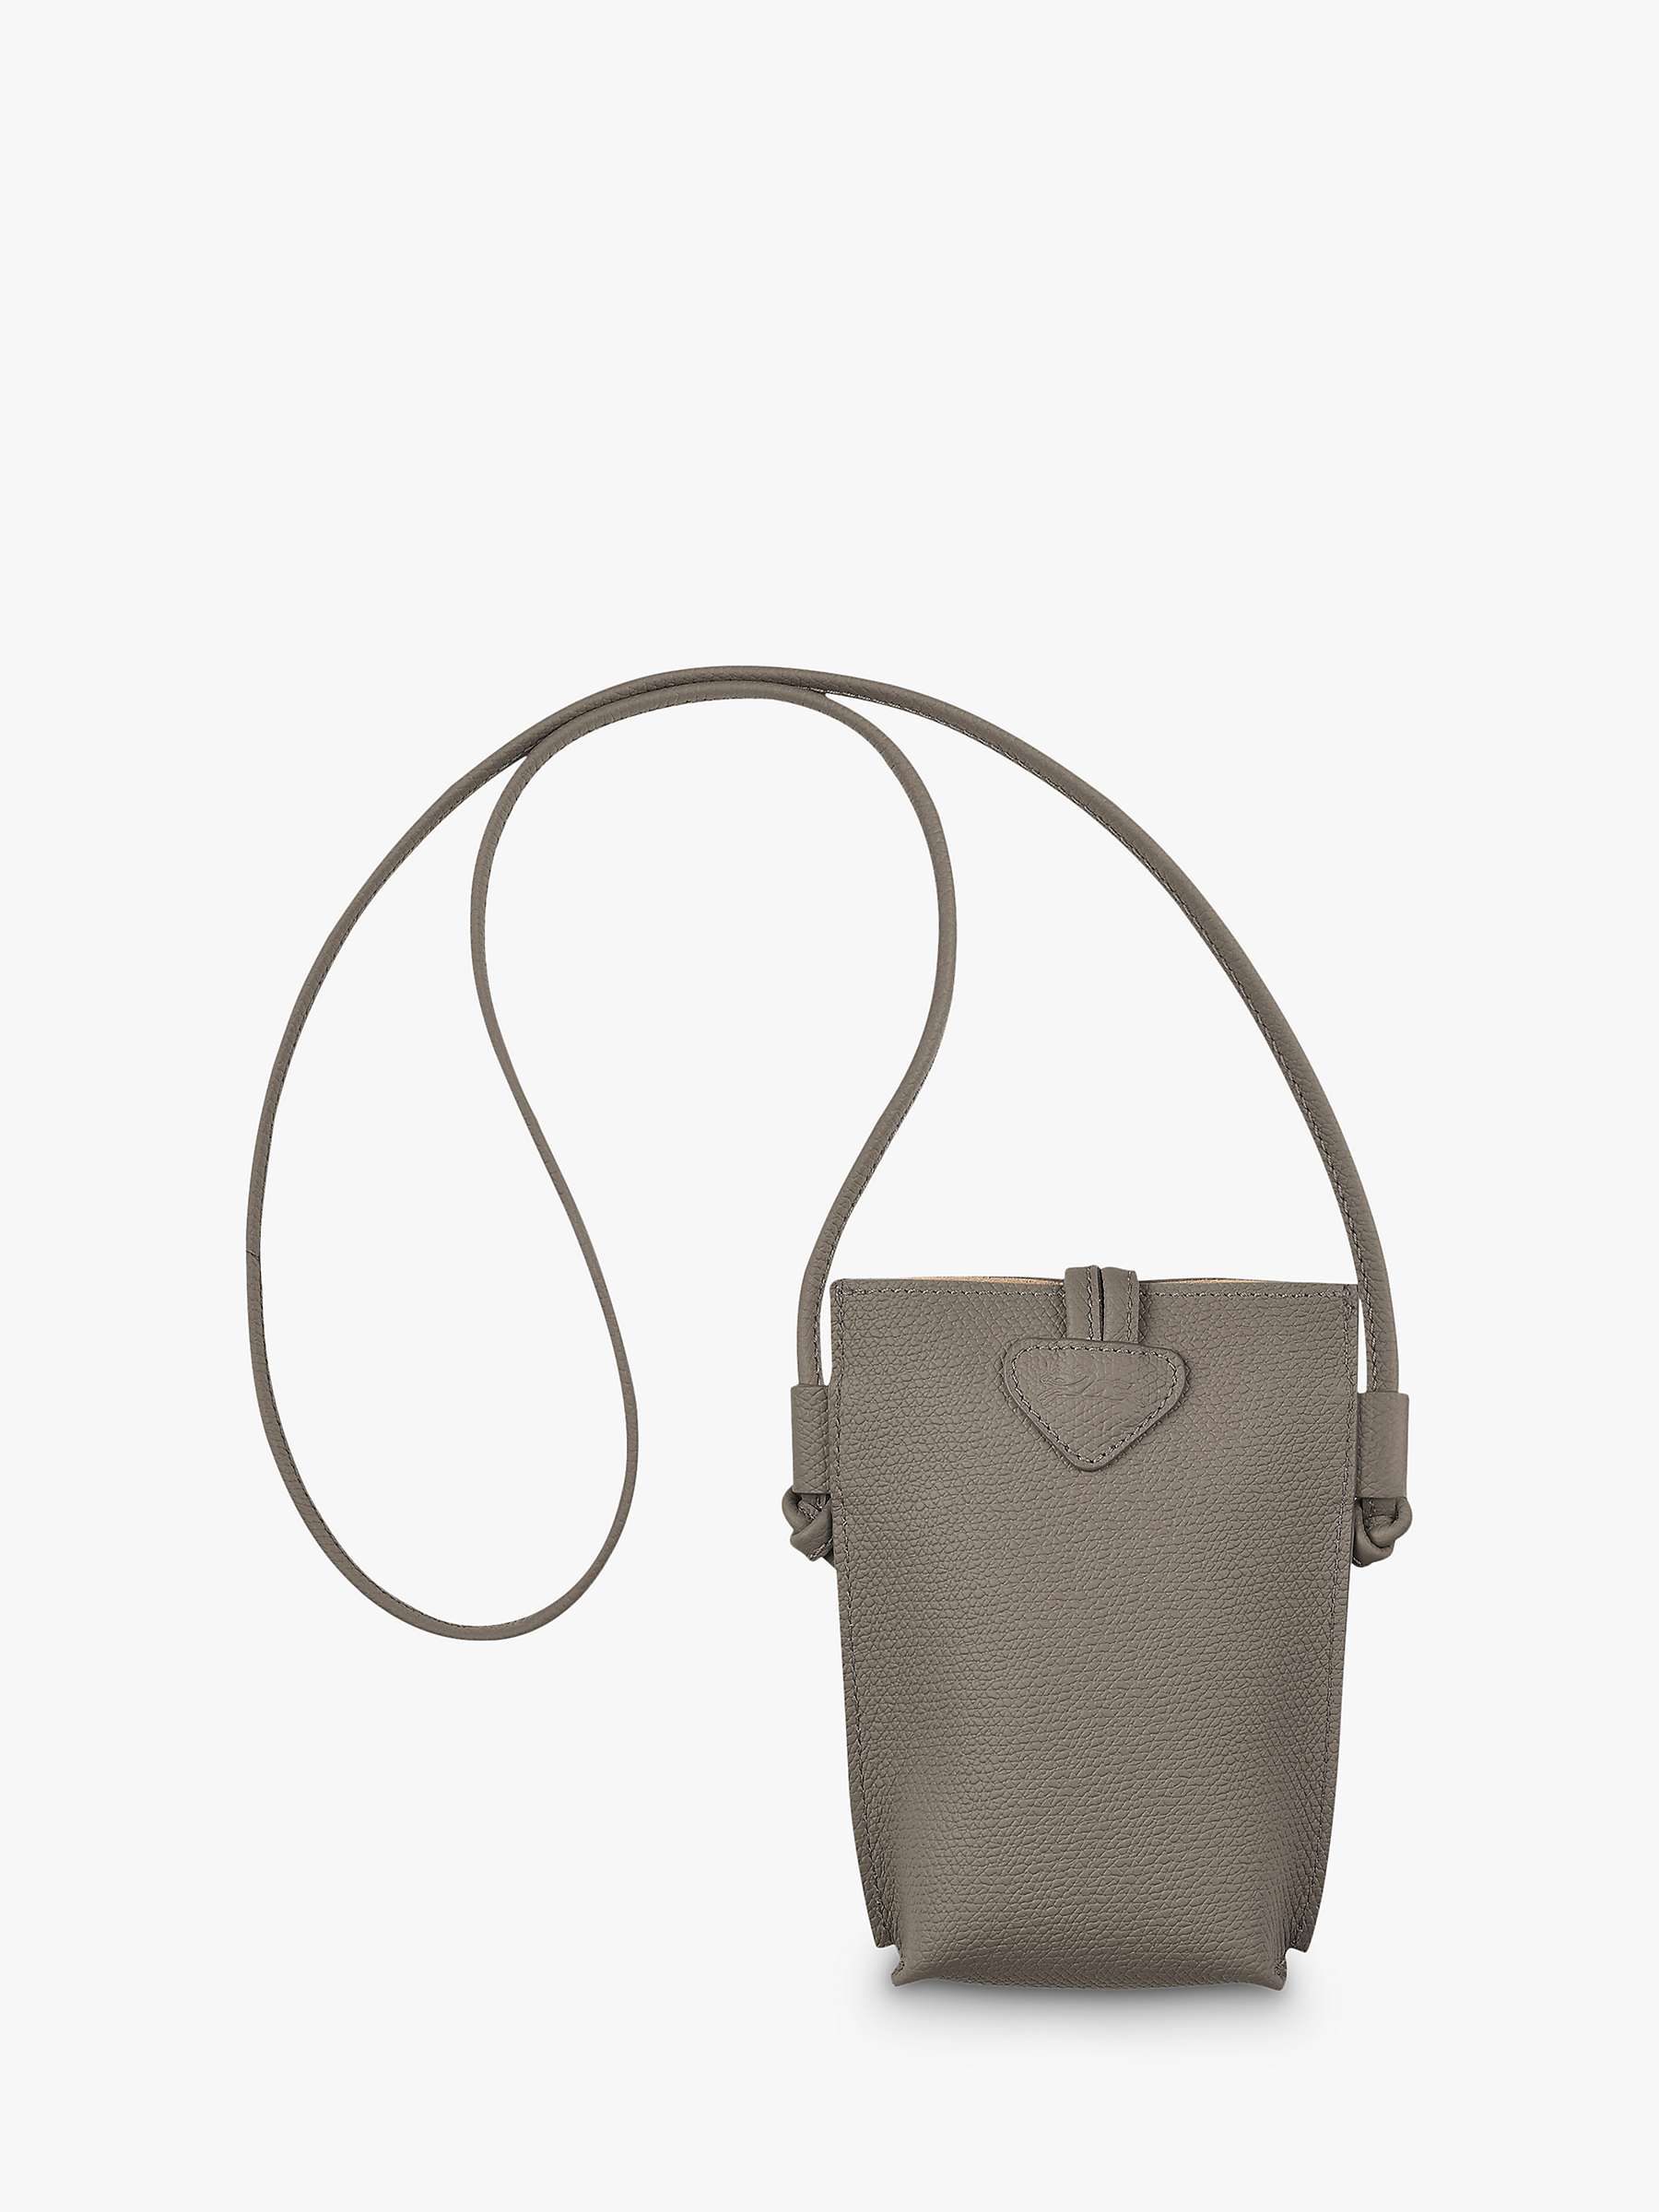 Buy Longchamp Roseau Leather Phone Pouch Bag Online at johnlewis.com